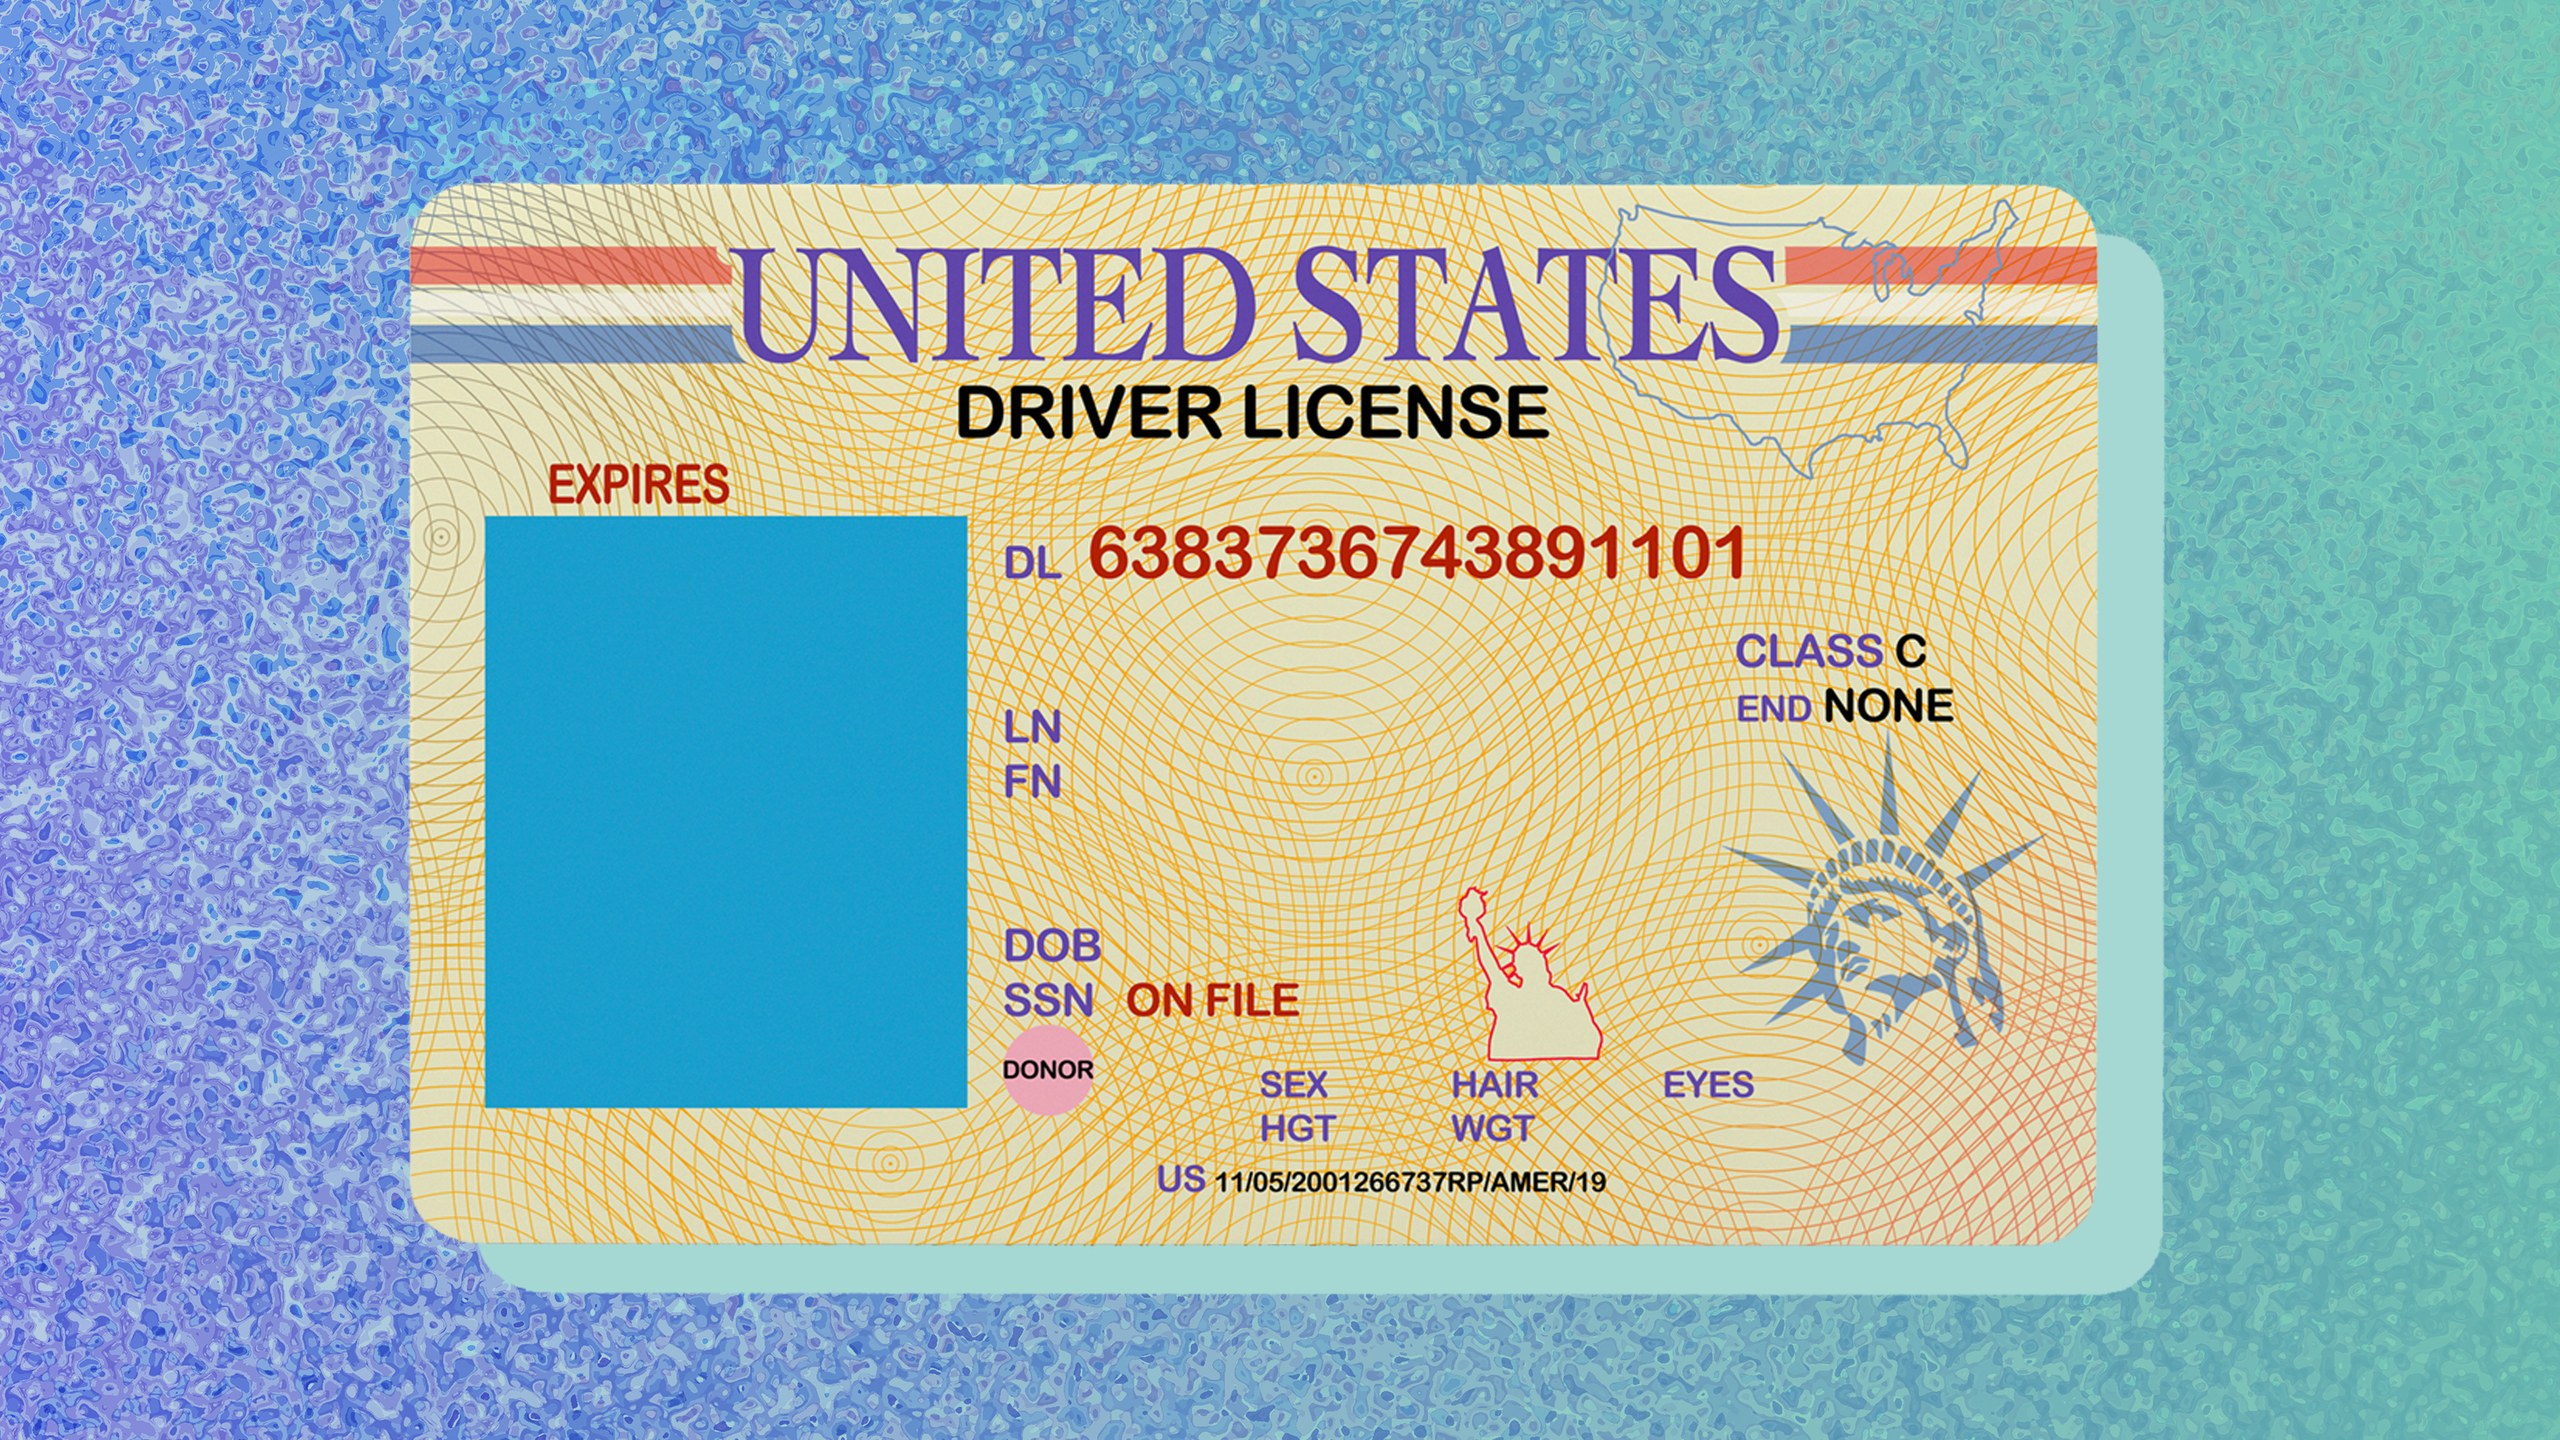 Why The Gender On My License Is Female Even Though I M Nonbinary